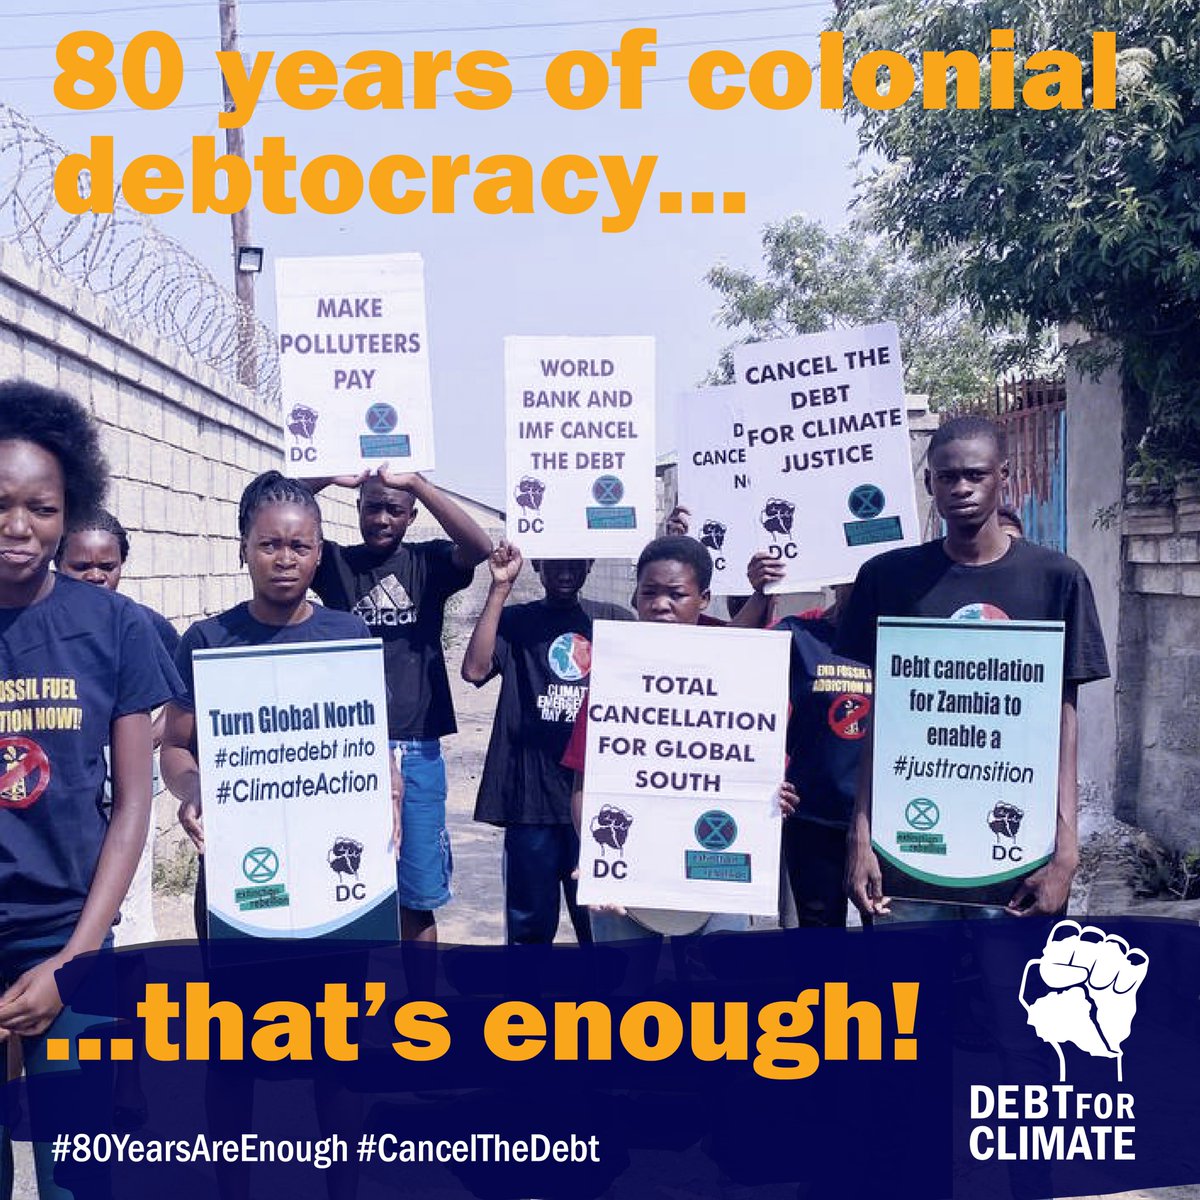 (german below) @IMFNews & @WorldBank - 80 years of economic exploitation is enough! For 80 years the #IMF & #WorldBank have screwed over Global South countries by trapping them in massive debt, forcing them to exploit their people & environment. #80YearsAreEnough